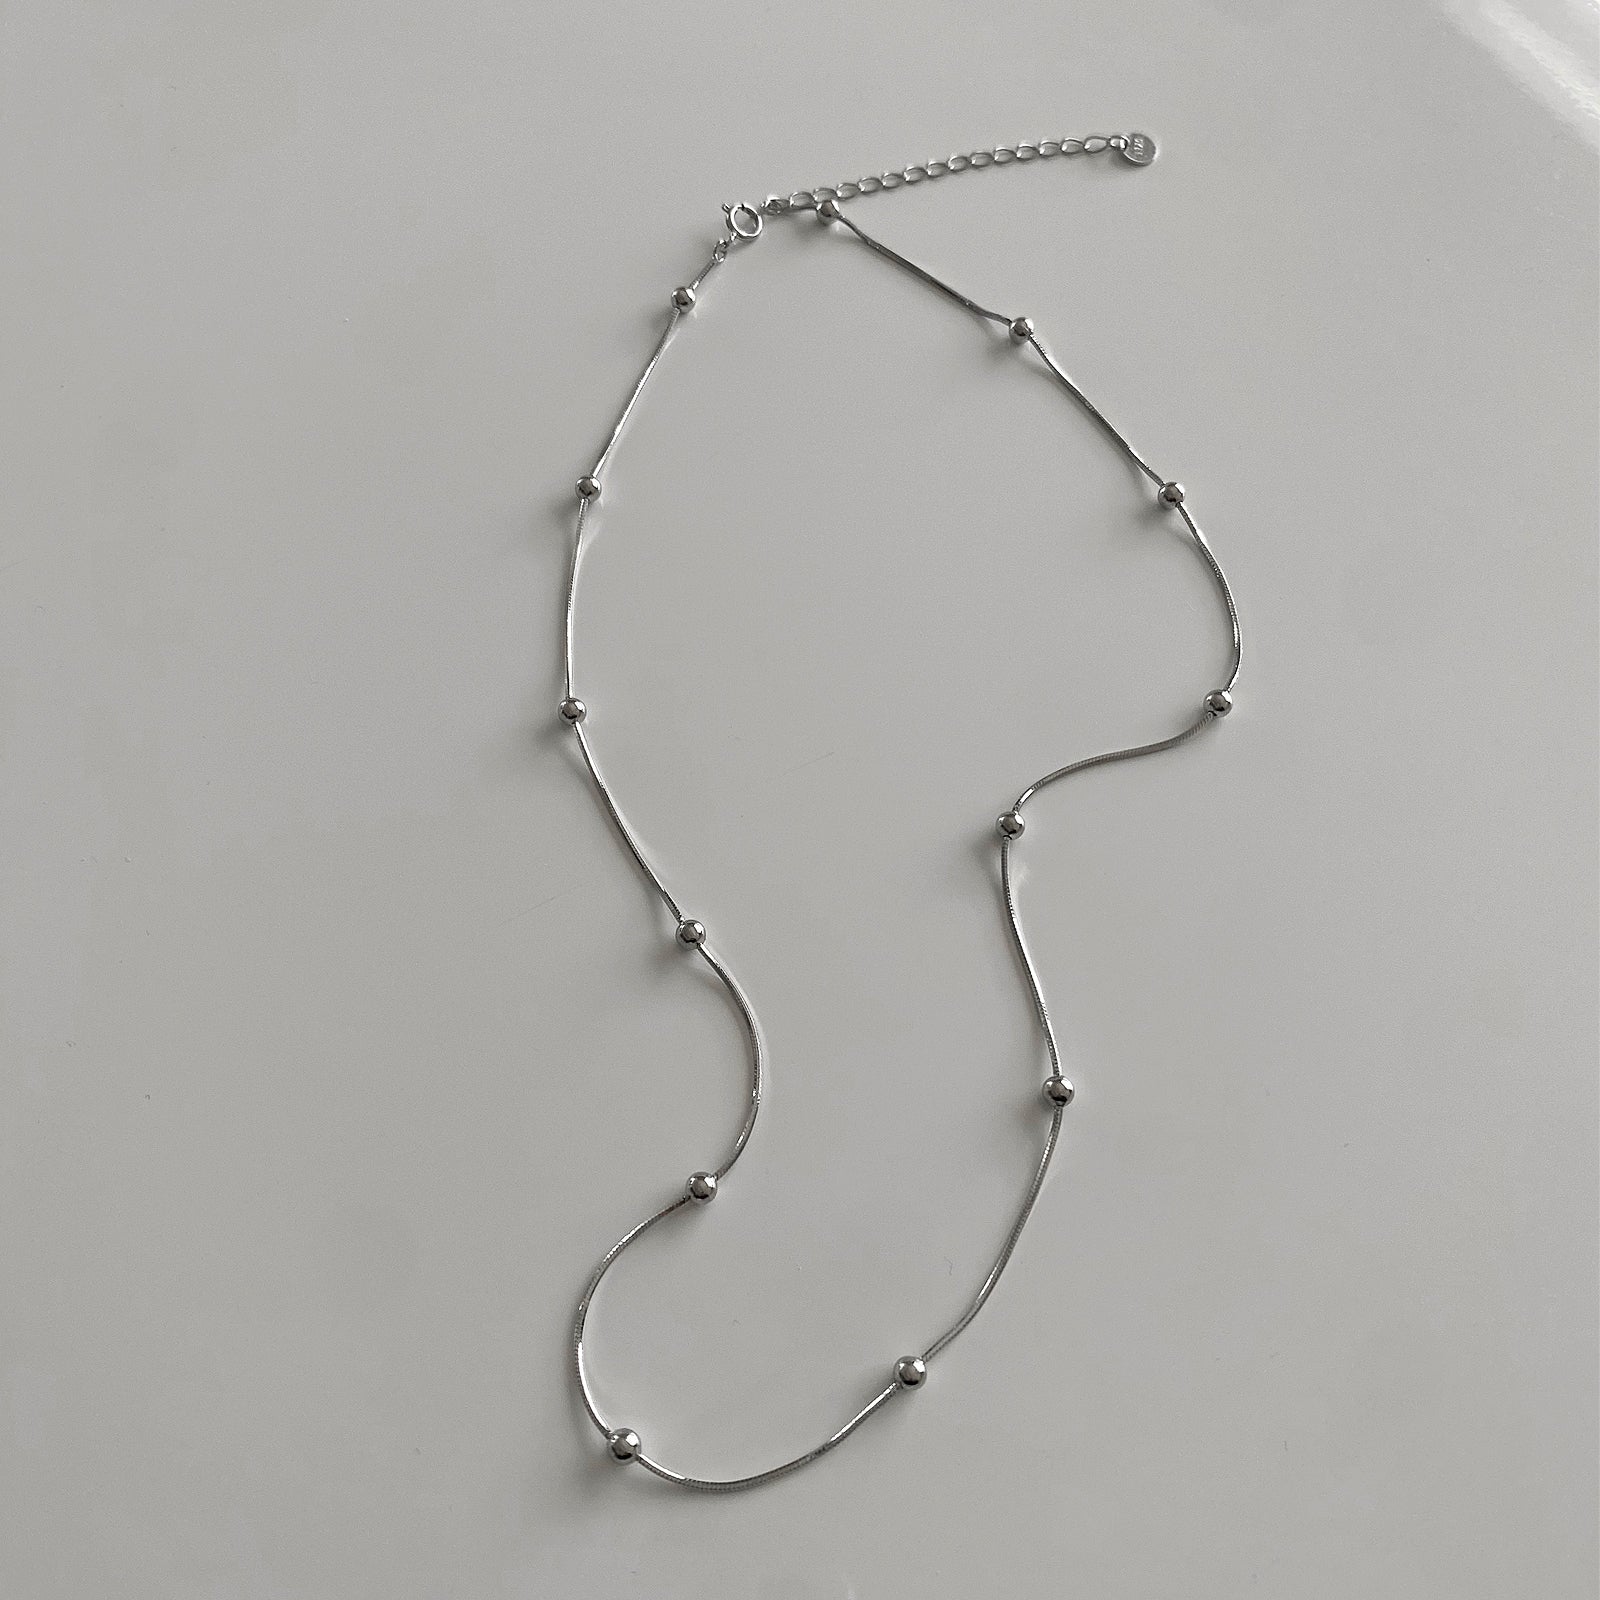 DAINTY BEADED NECKLACE FEATURES A SNAKE CHAIN WITH SILVER BEADS. THIS NECKLACE IS MADE OF 925 STERLING SILVER.